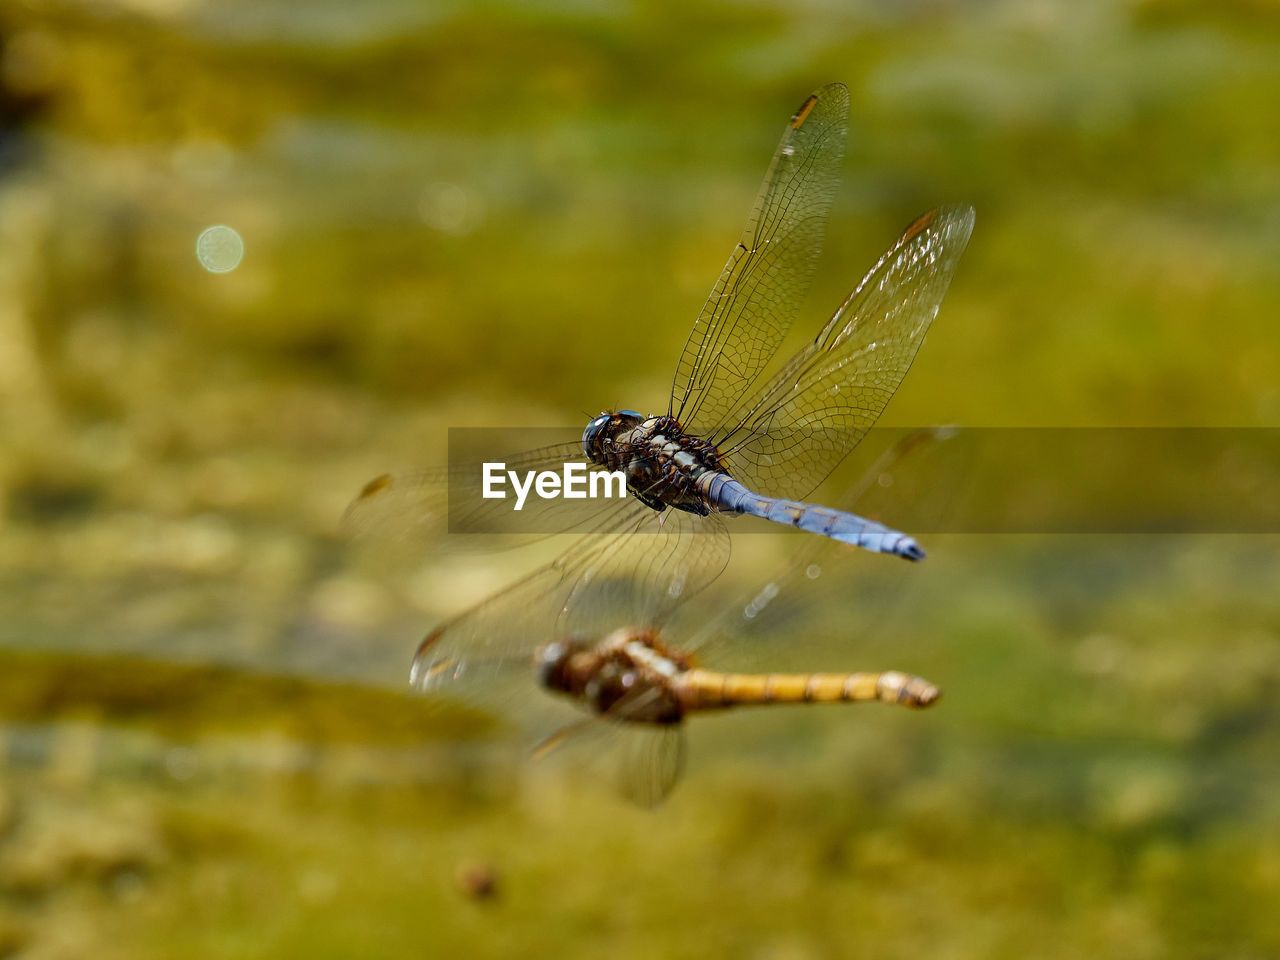 Dragonflies flying over a pond, near onteniente, spain